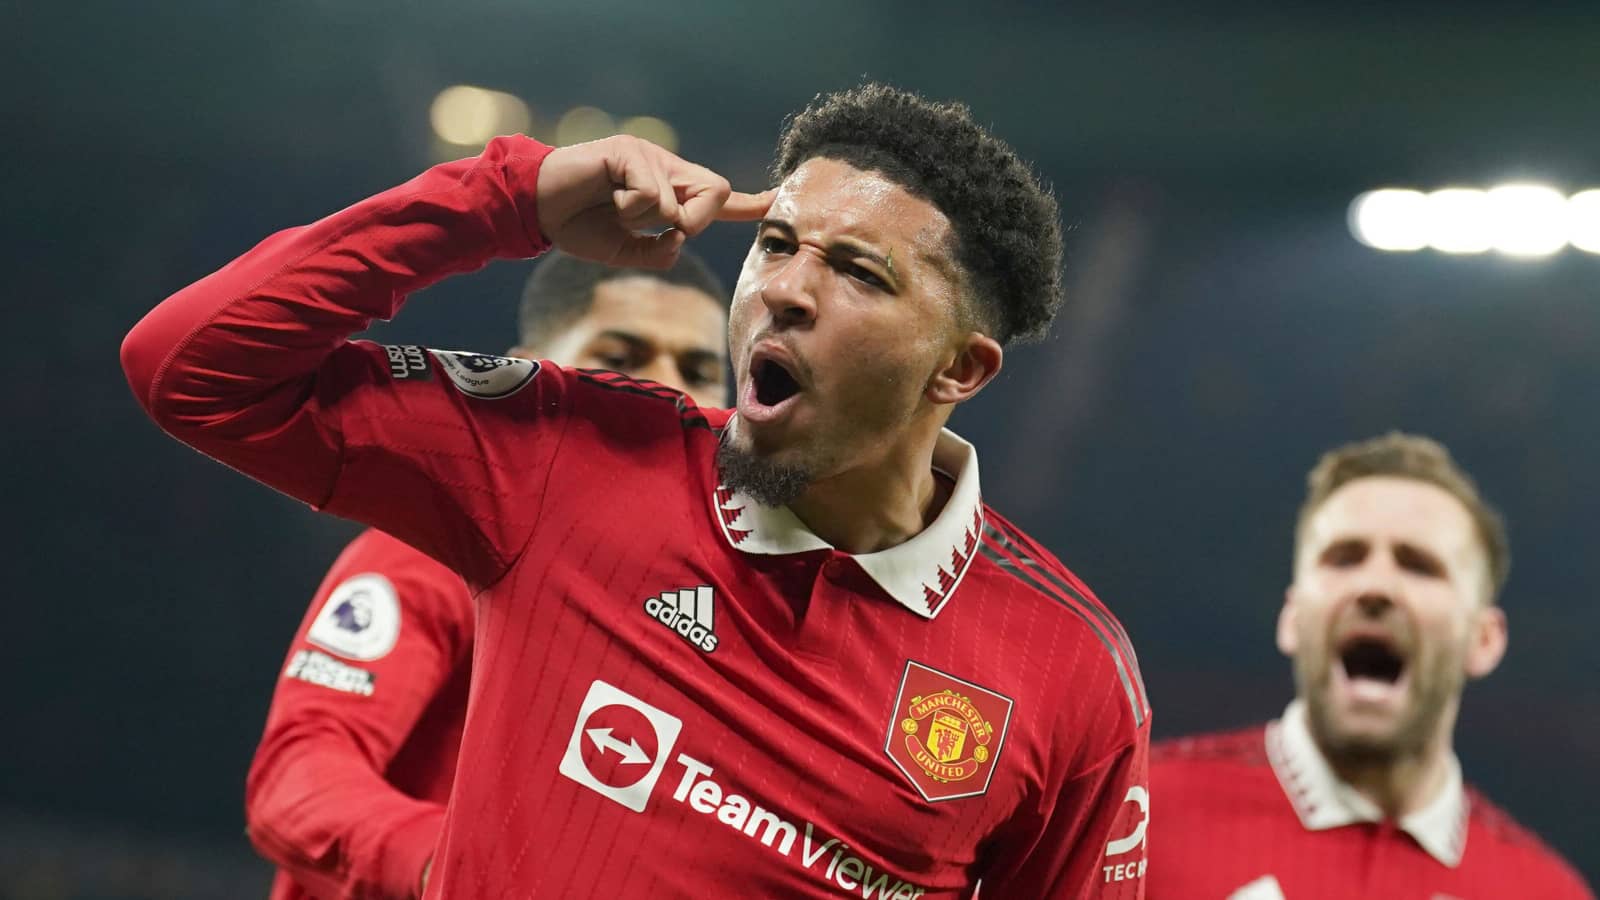 Real reason Jadon Sancho is being punished by Man United